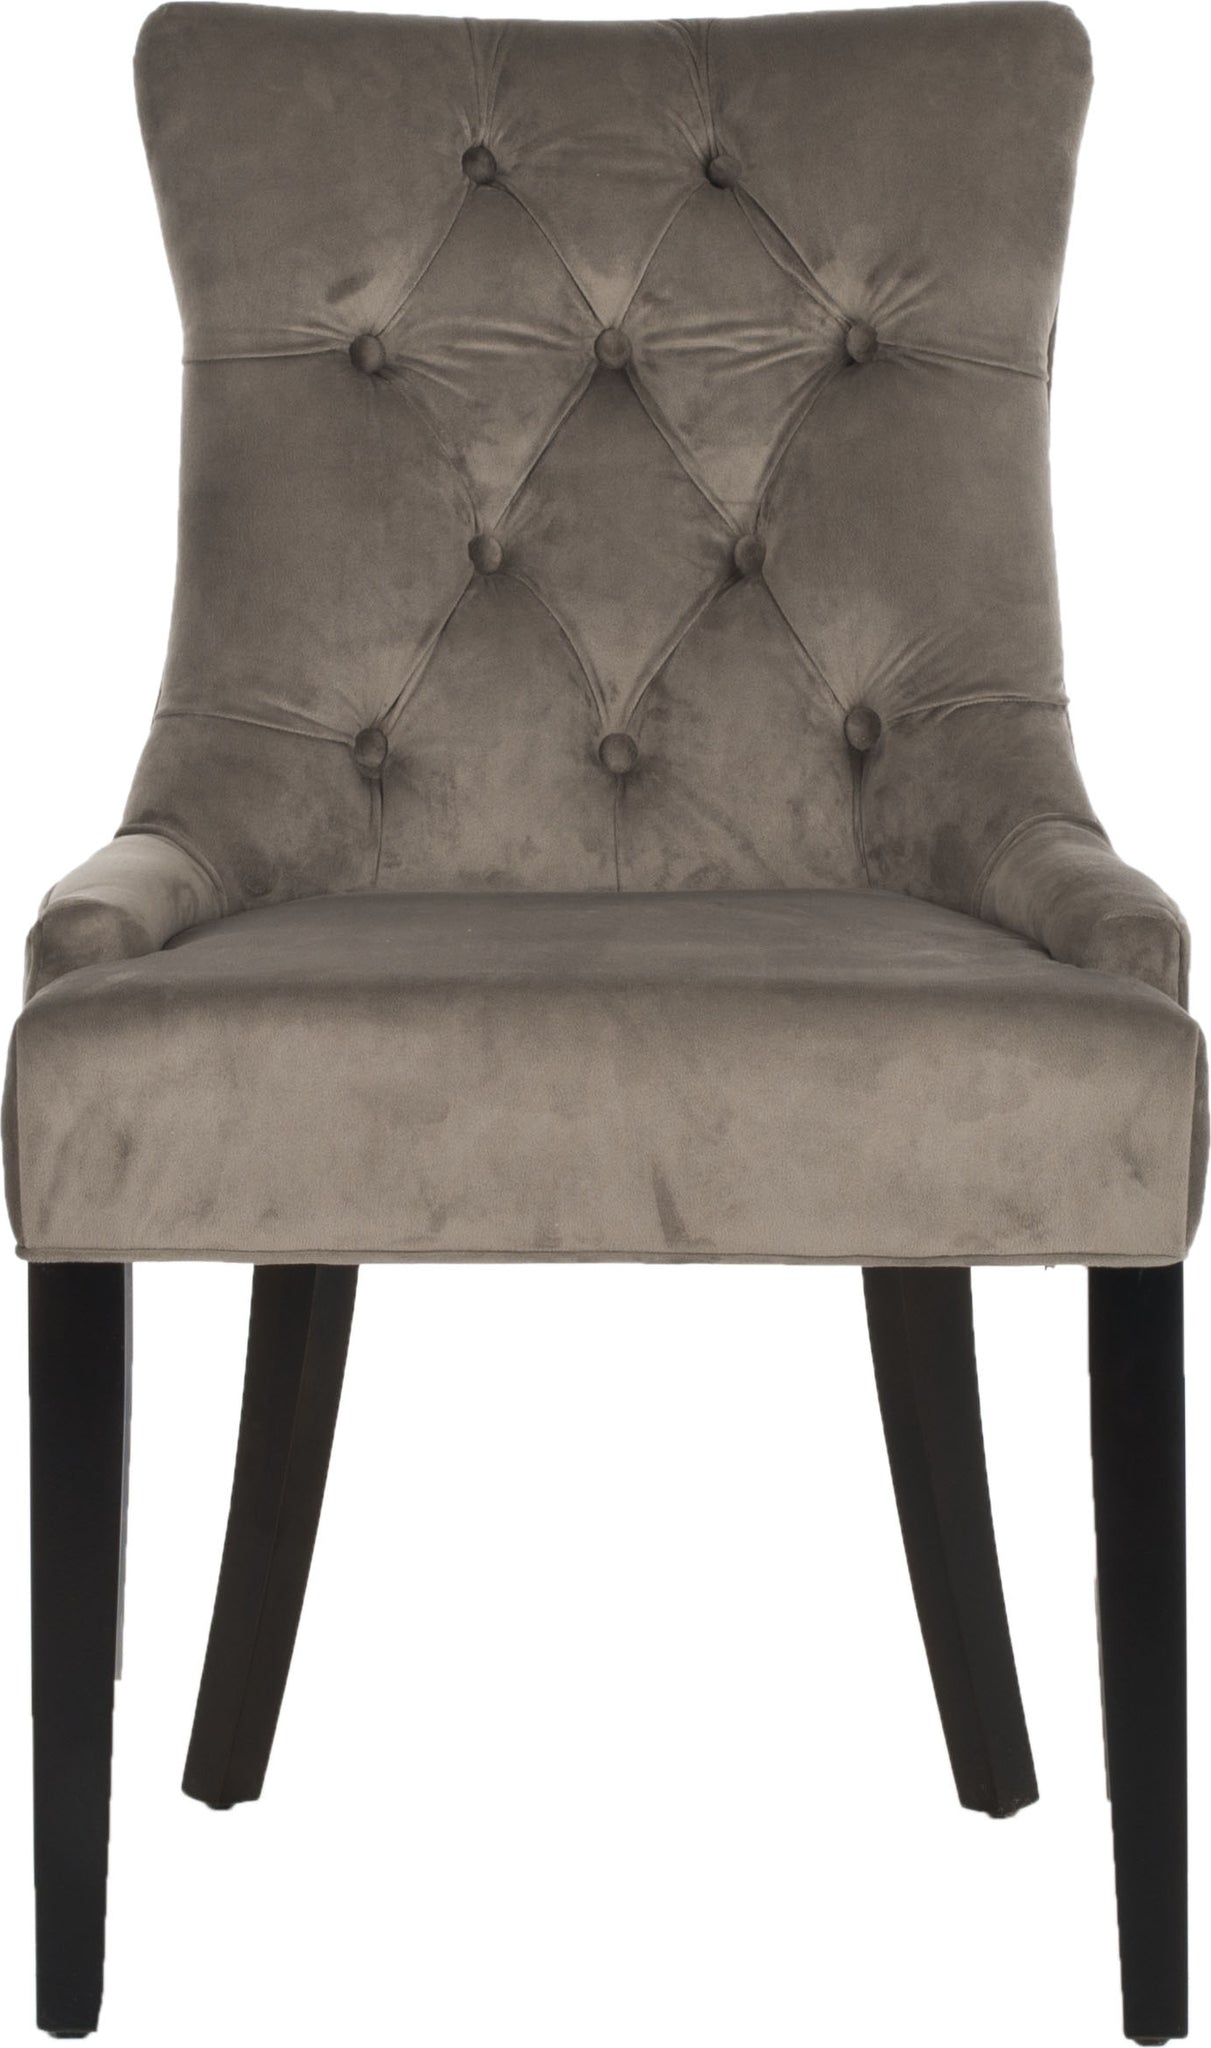 Safavieh Abby 19''H Tufted Side Chairs (SET Of 2) Mushroom Taupe and Espresso Furniture main image